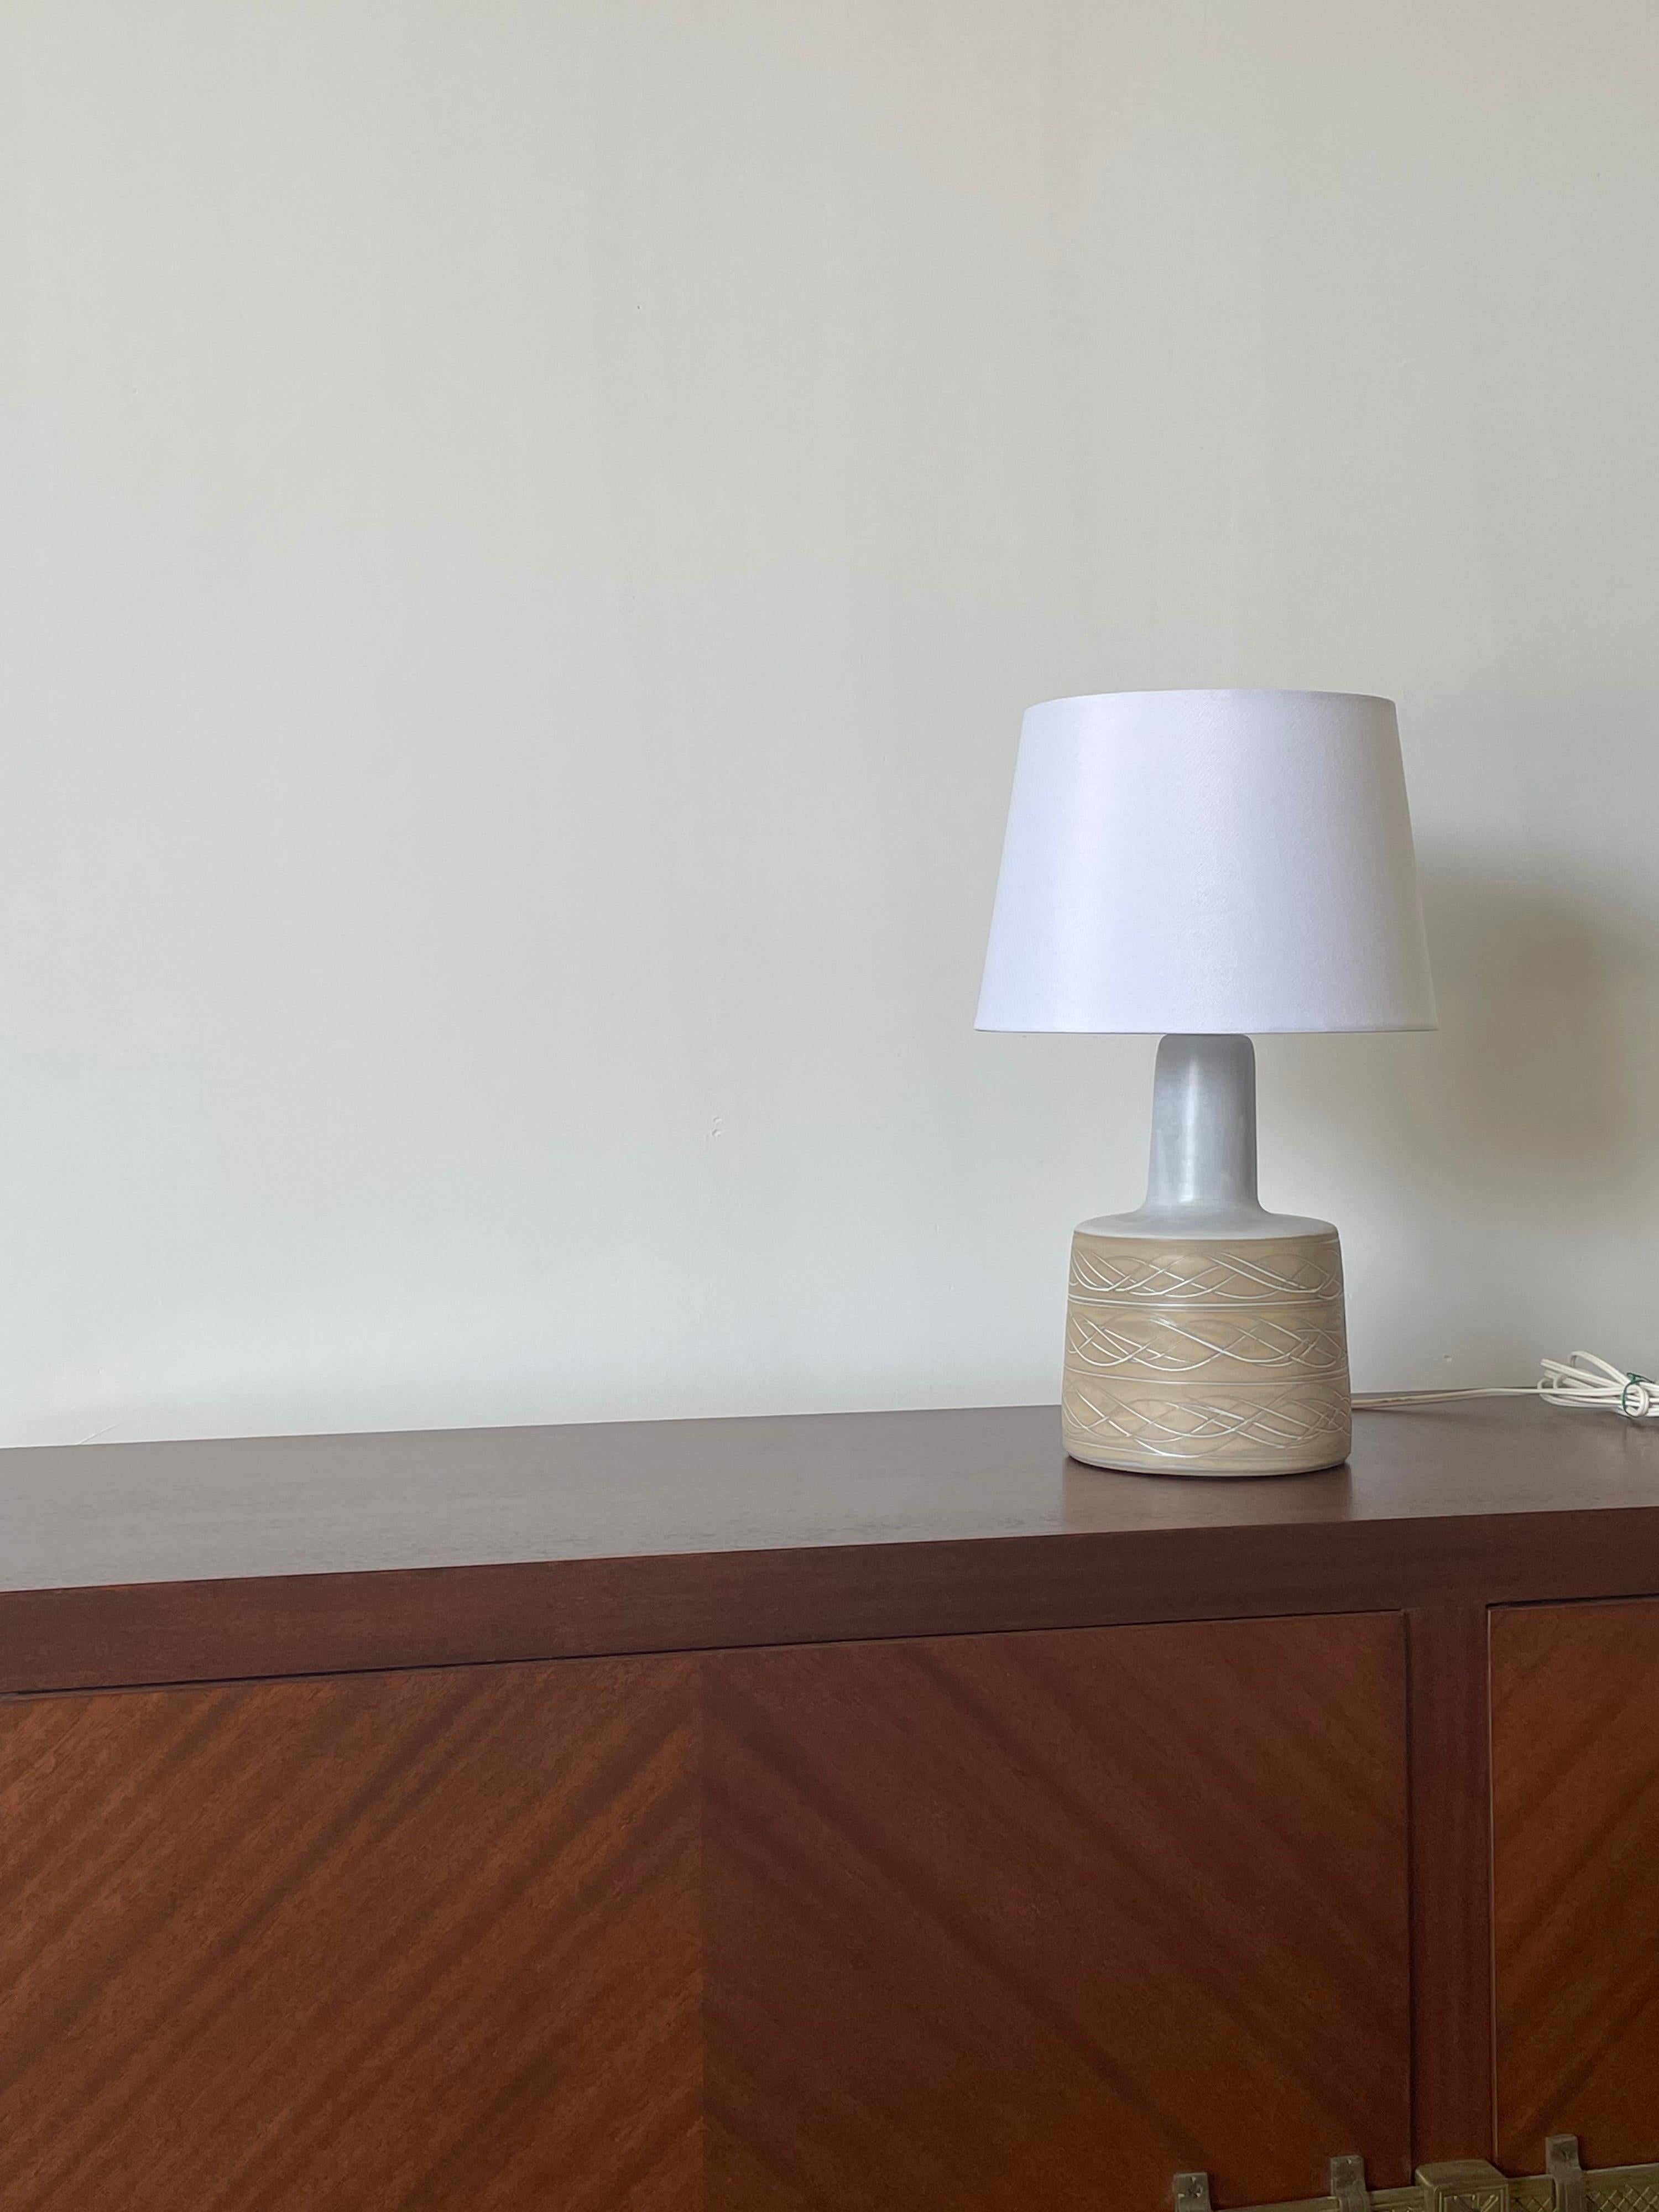 Wonderful table lamp by ceramicist duo Jane and Gordon Martz for Marshall Studios. Organic color palette with an off white and tan pattern. 

Overall dimensions: 
15.5” tall 
10” wide 

Ceramic portion only 
9” tall 
6” across.